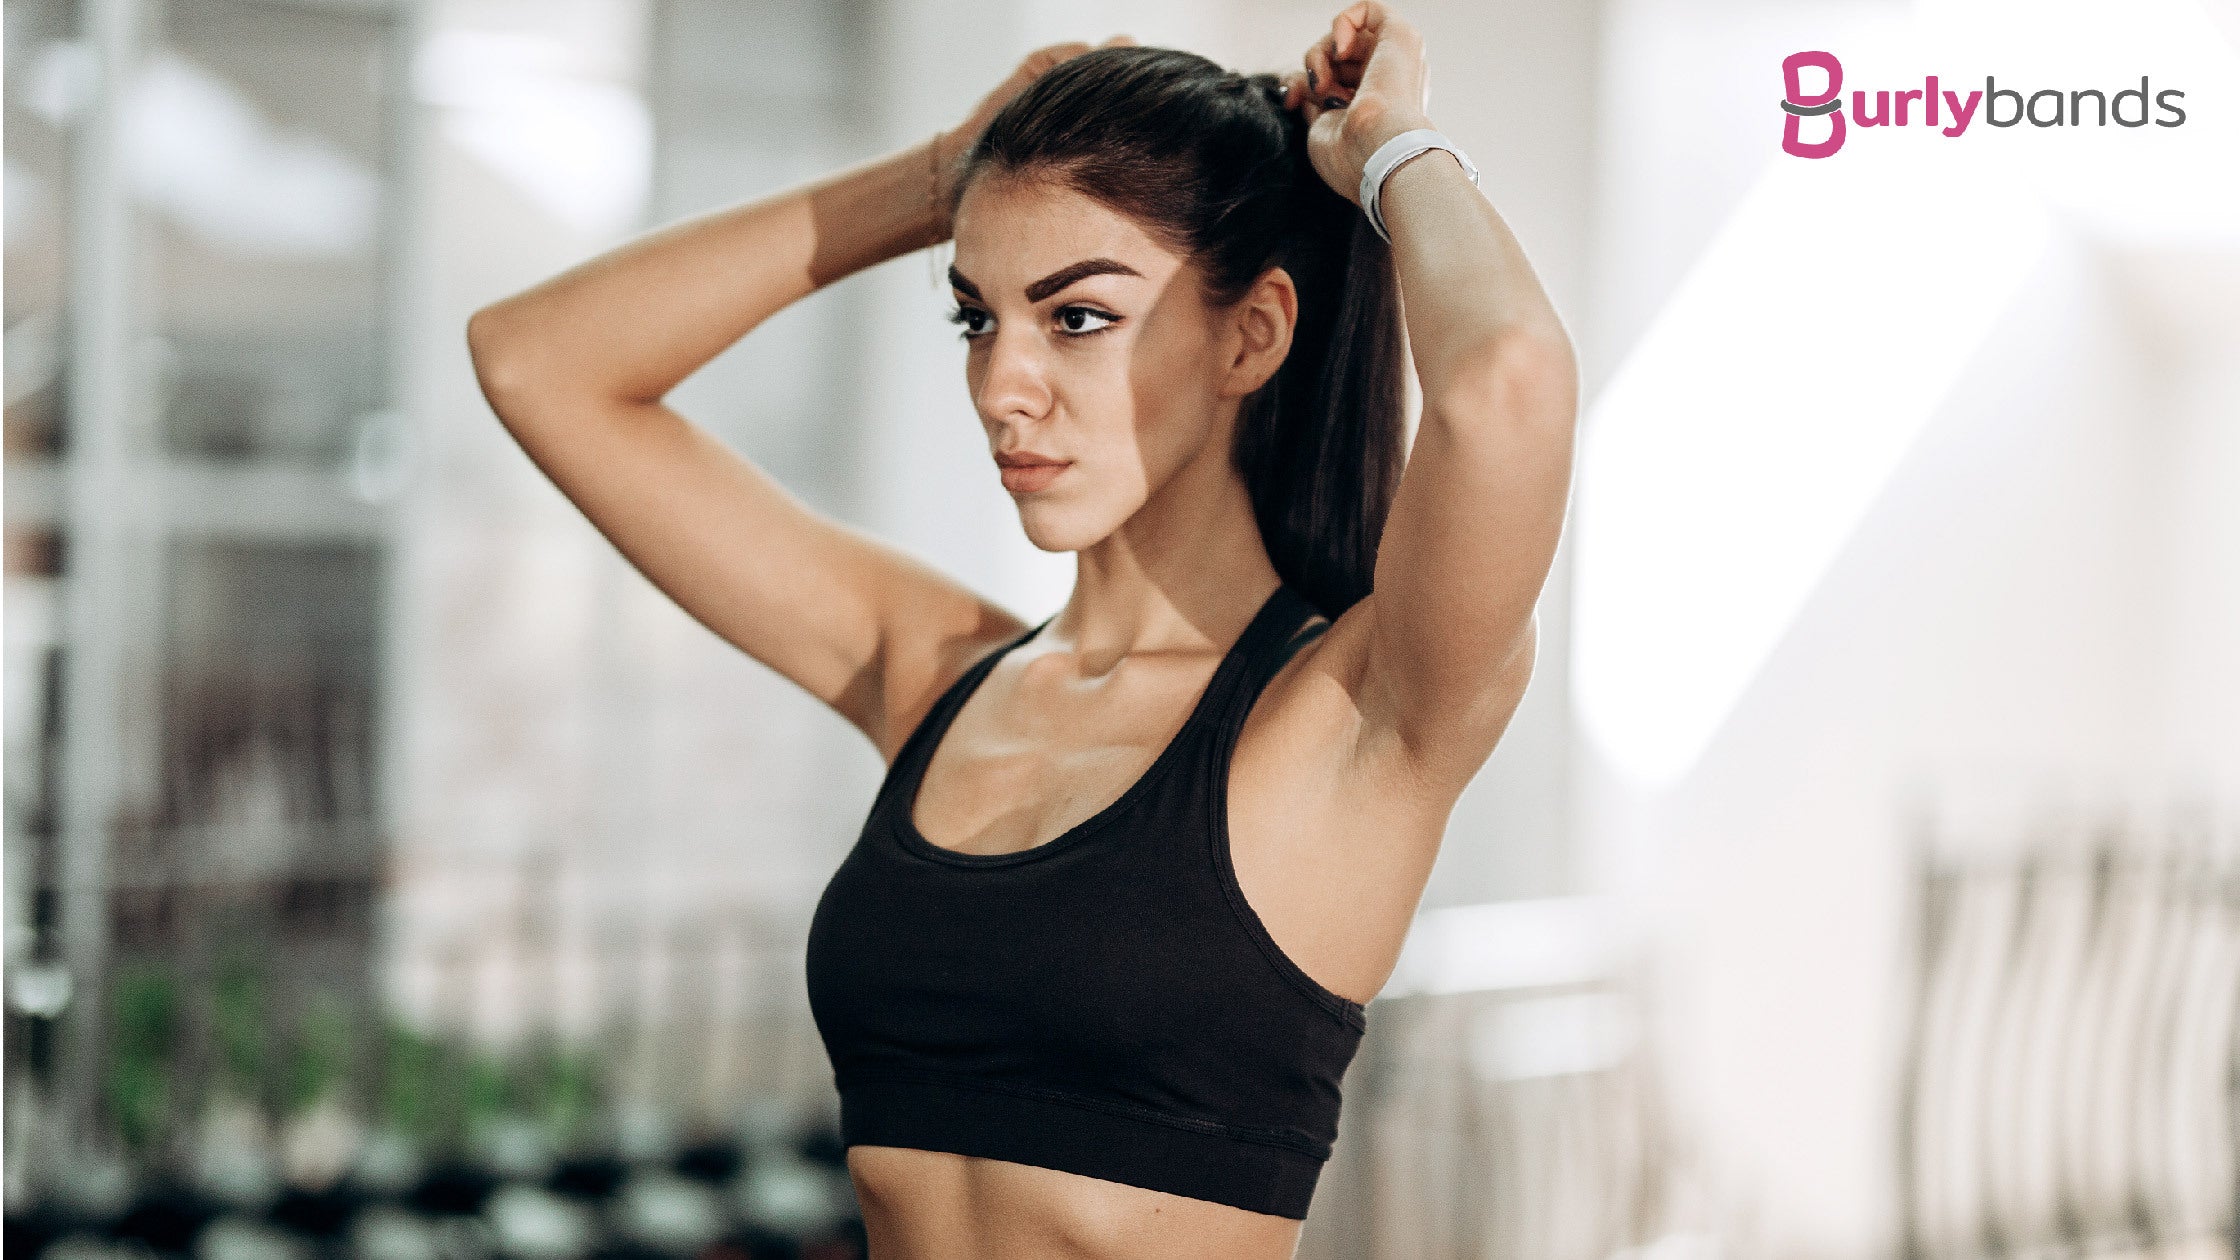 How Do You Tie Your Hair When Working Out in the Gym? – Burlybands